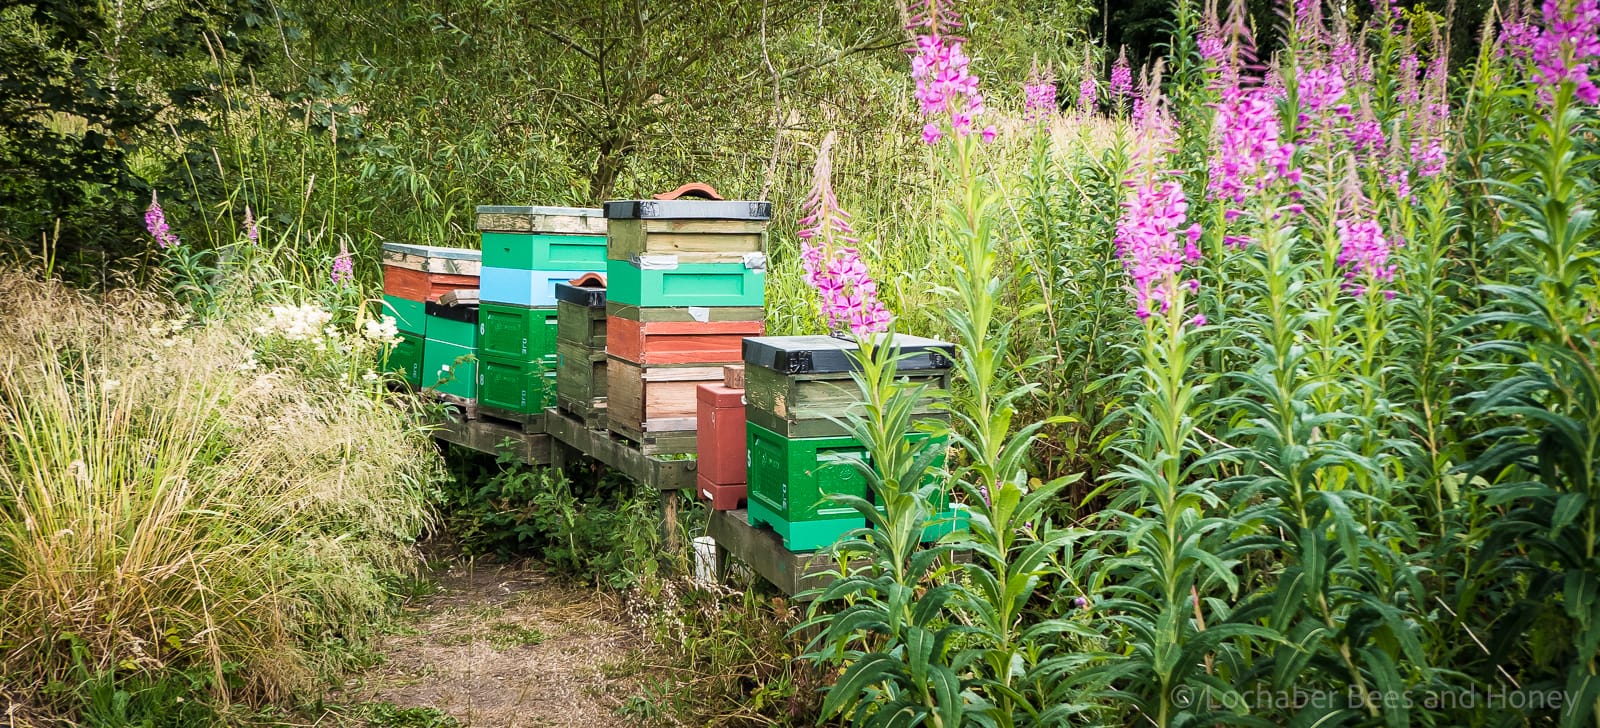 Midsummer in the apiary